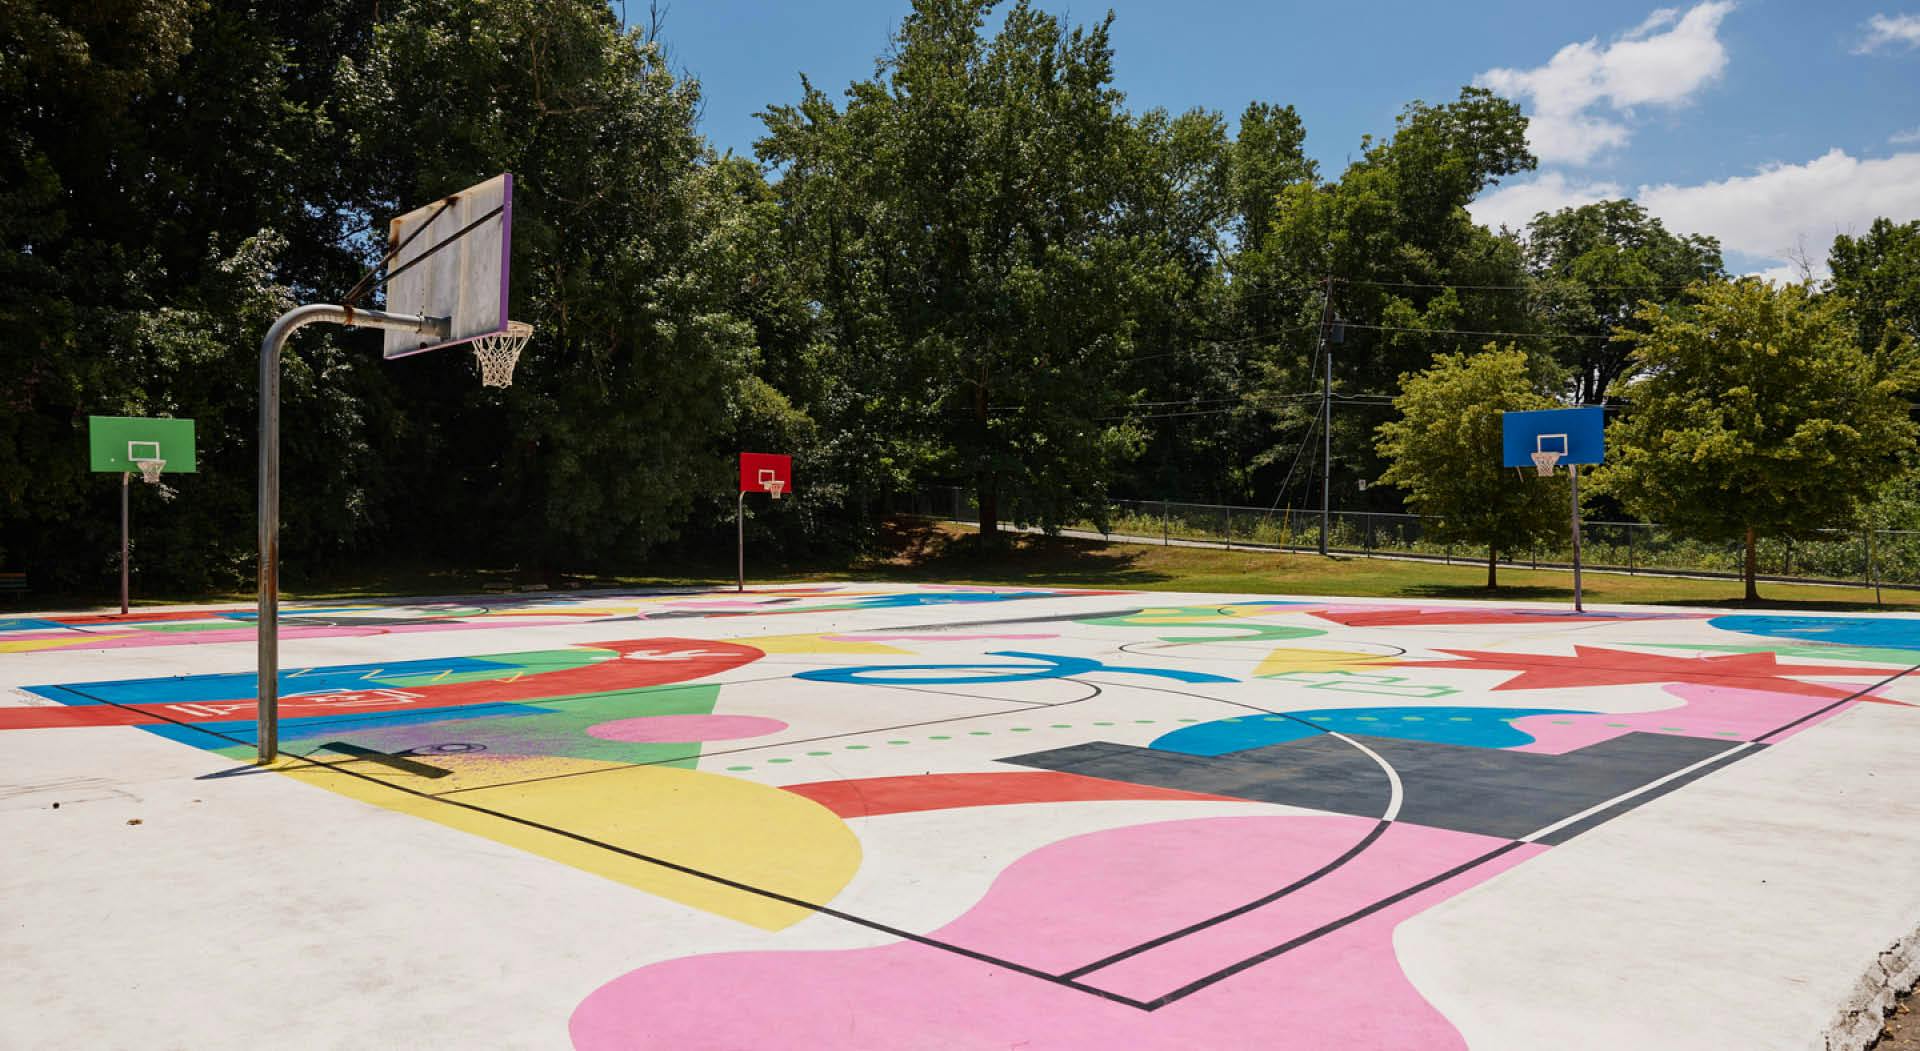 Overlapping basketball courts are painted with a colorful mural from the SCAD SERVE initiative. (Photo Credit: Erin Sintos)